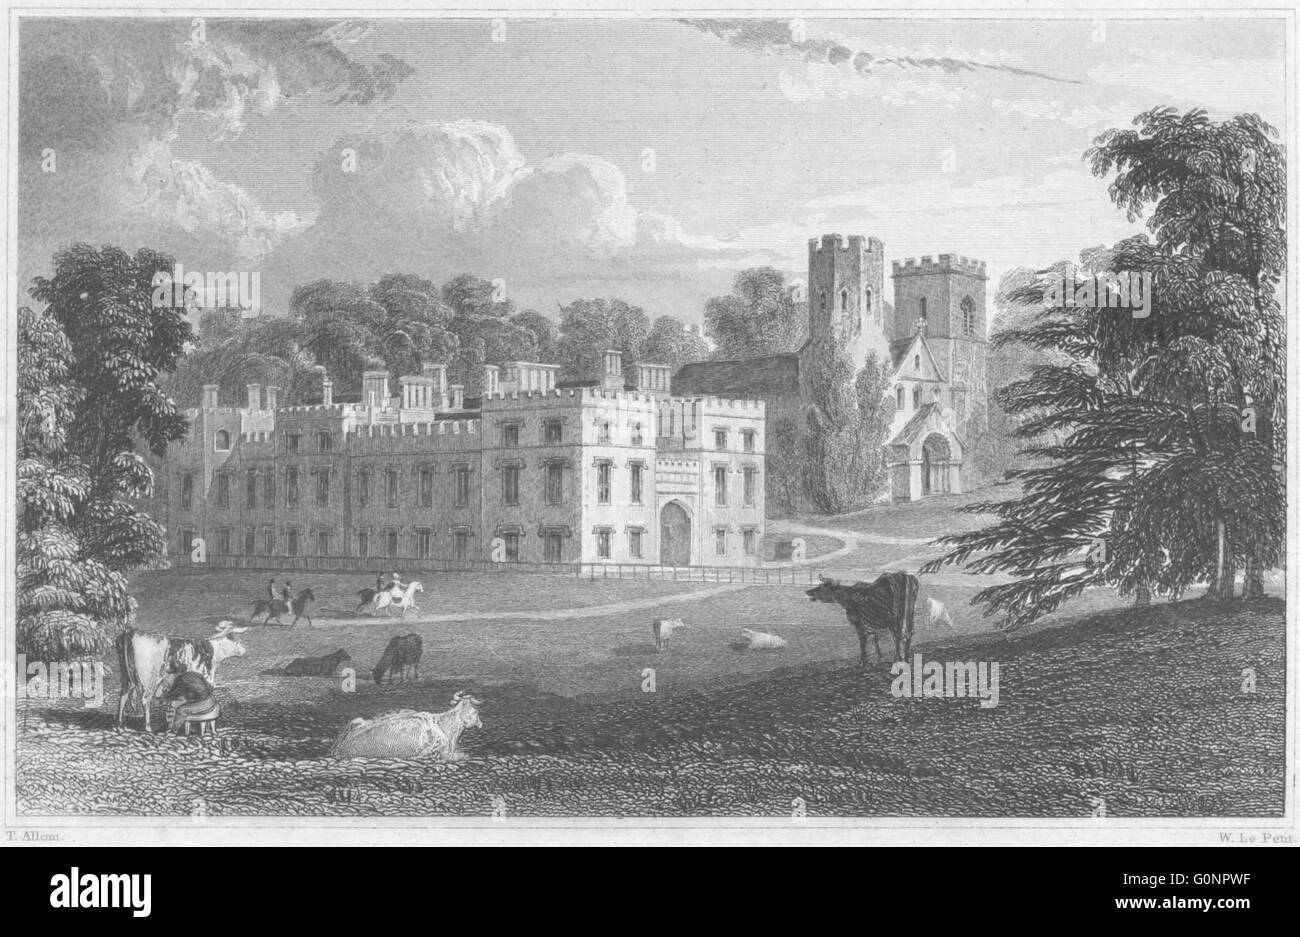 CORNWALL: Port Eliot (The seat of the Earl of St Germans), antique print 1831 Stock Photo